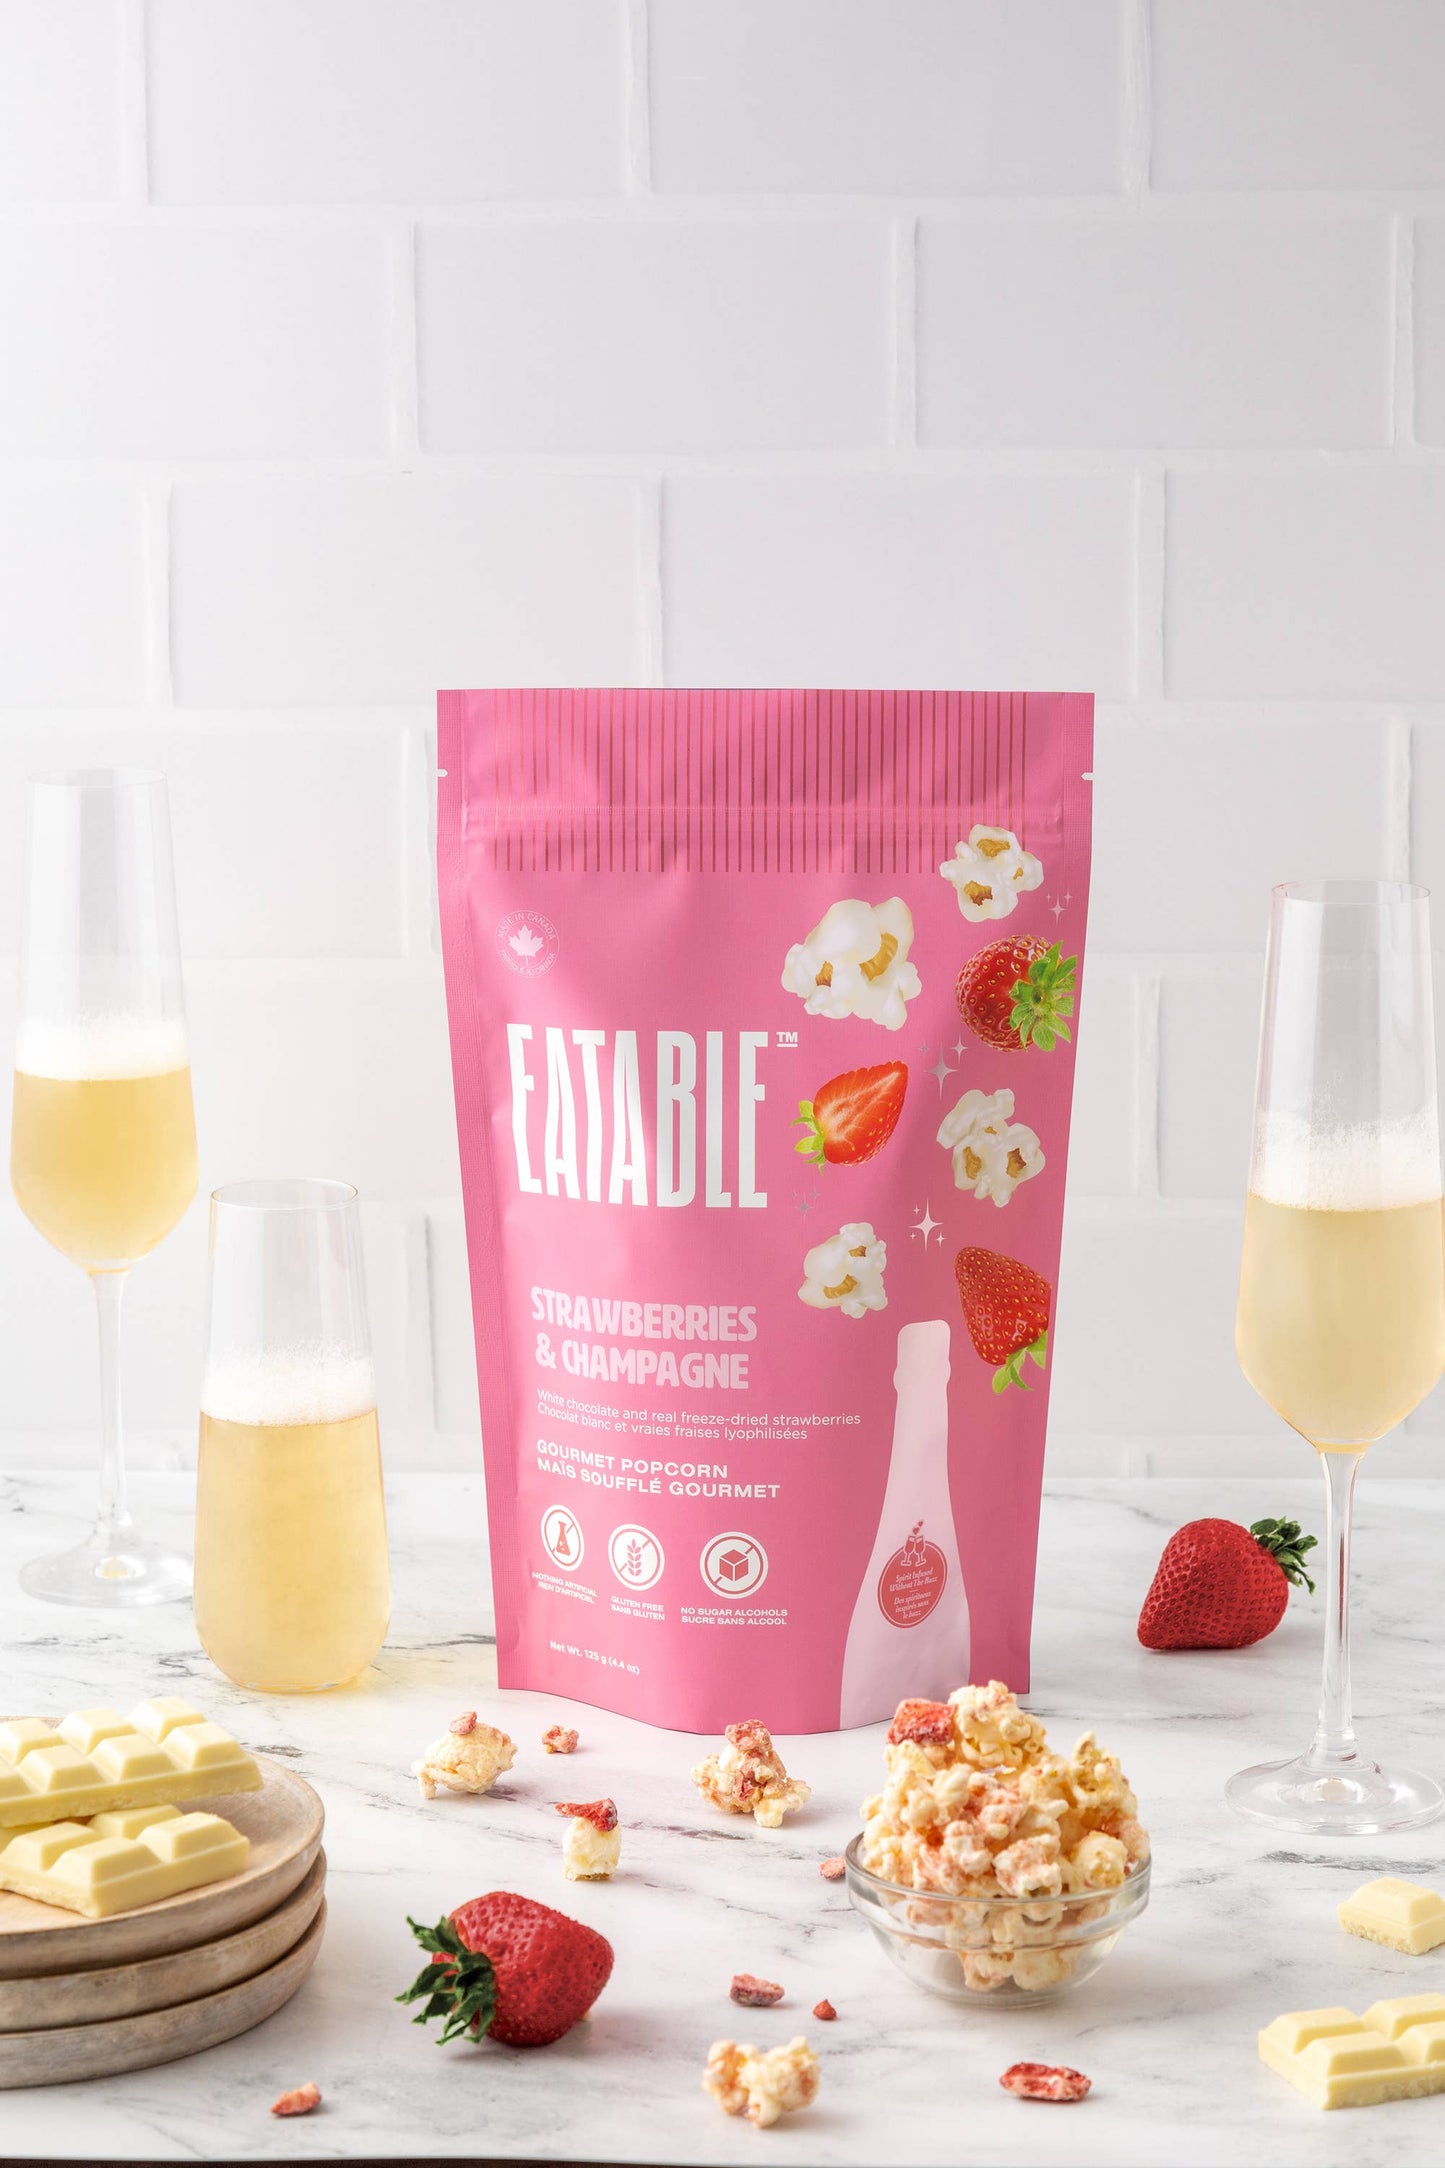 EATABLE Popcorn - NEW ✨ Strawberries & Champagne (125g) 🍿🍓 Chocolate Popcorn: US Package